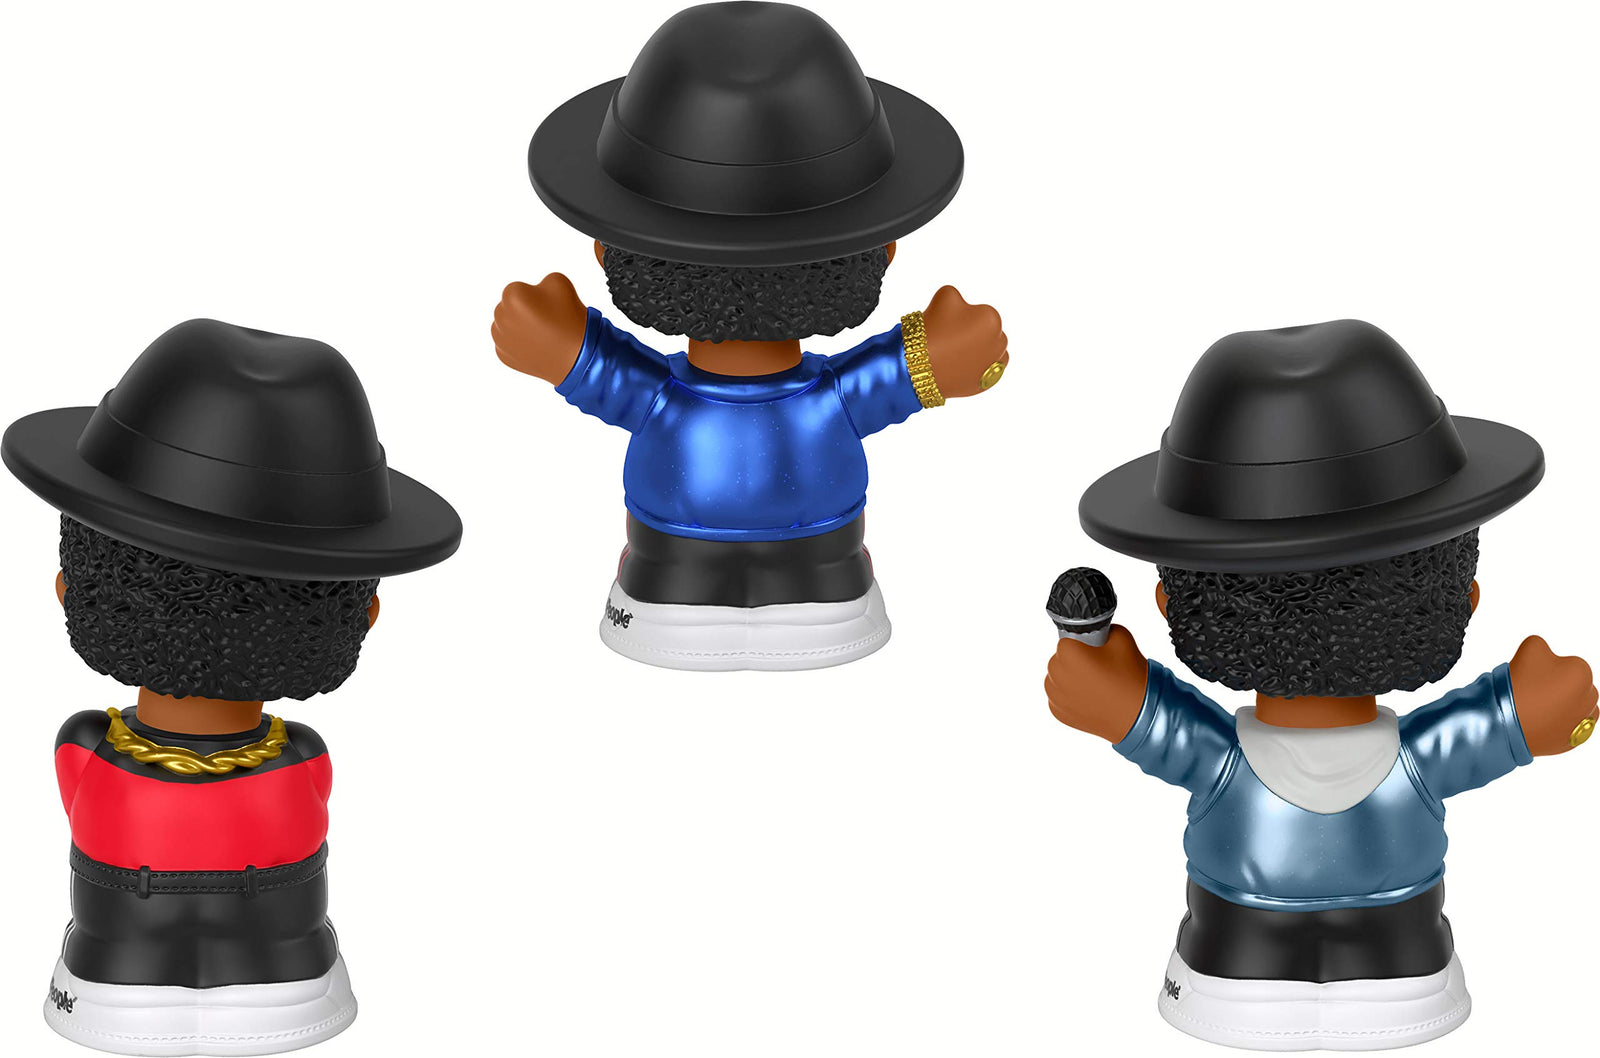 Fisher-Price Little People Collector Run DMC, Set of 3 Figures Styled Like The Iconic Hip Hop Group for Fans Ages 1-101 [Amazon Exclusive]